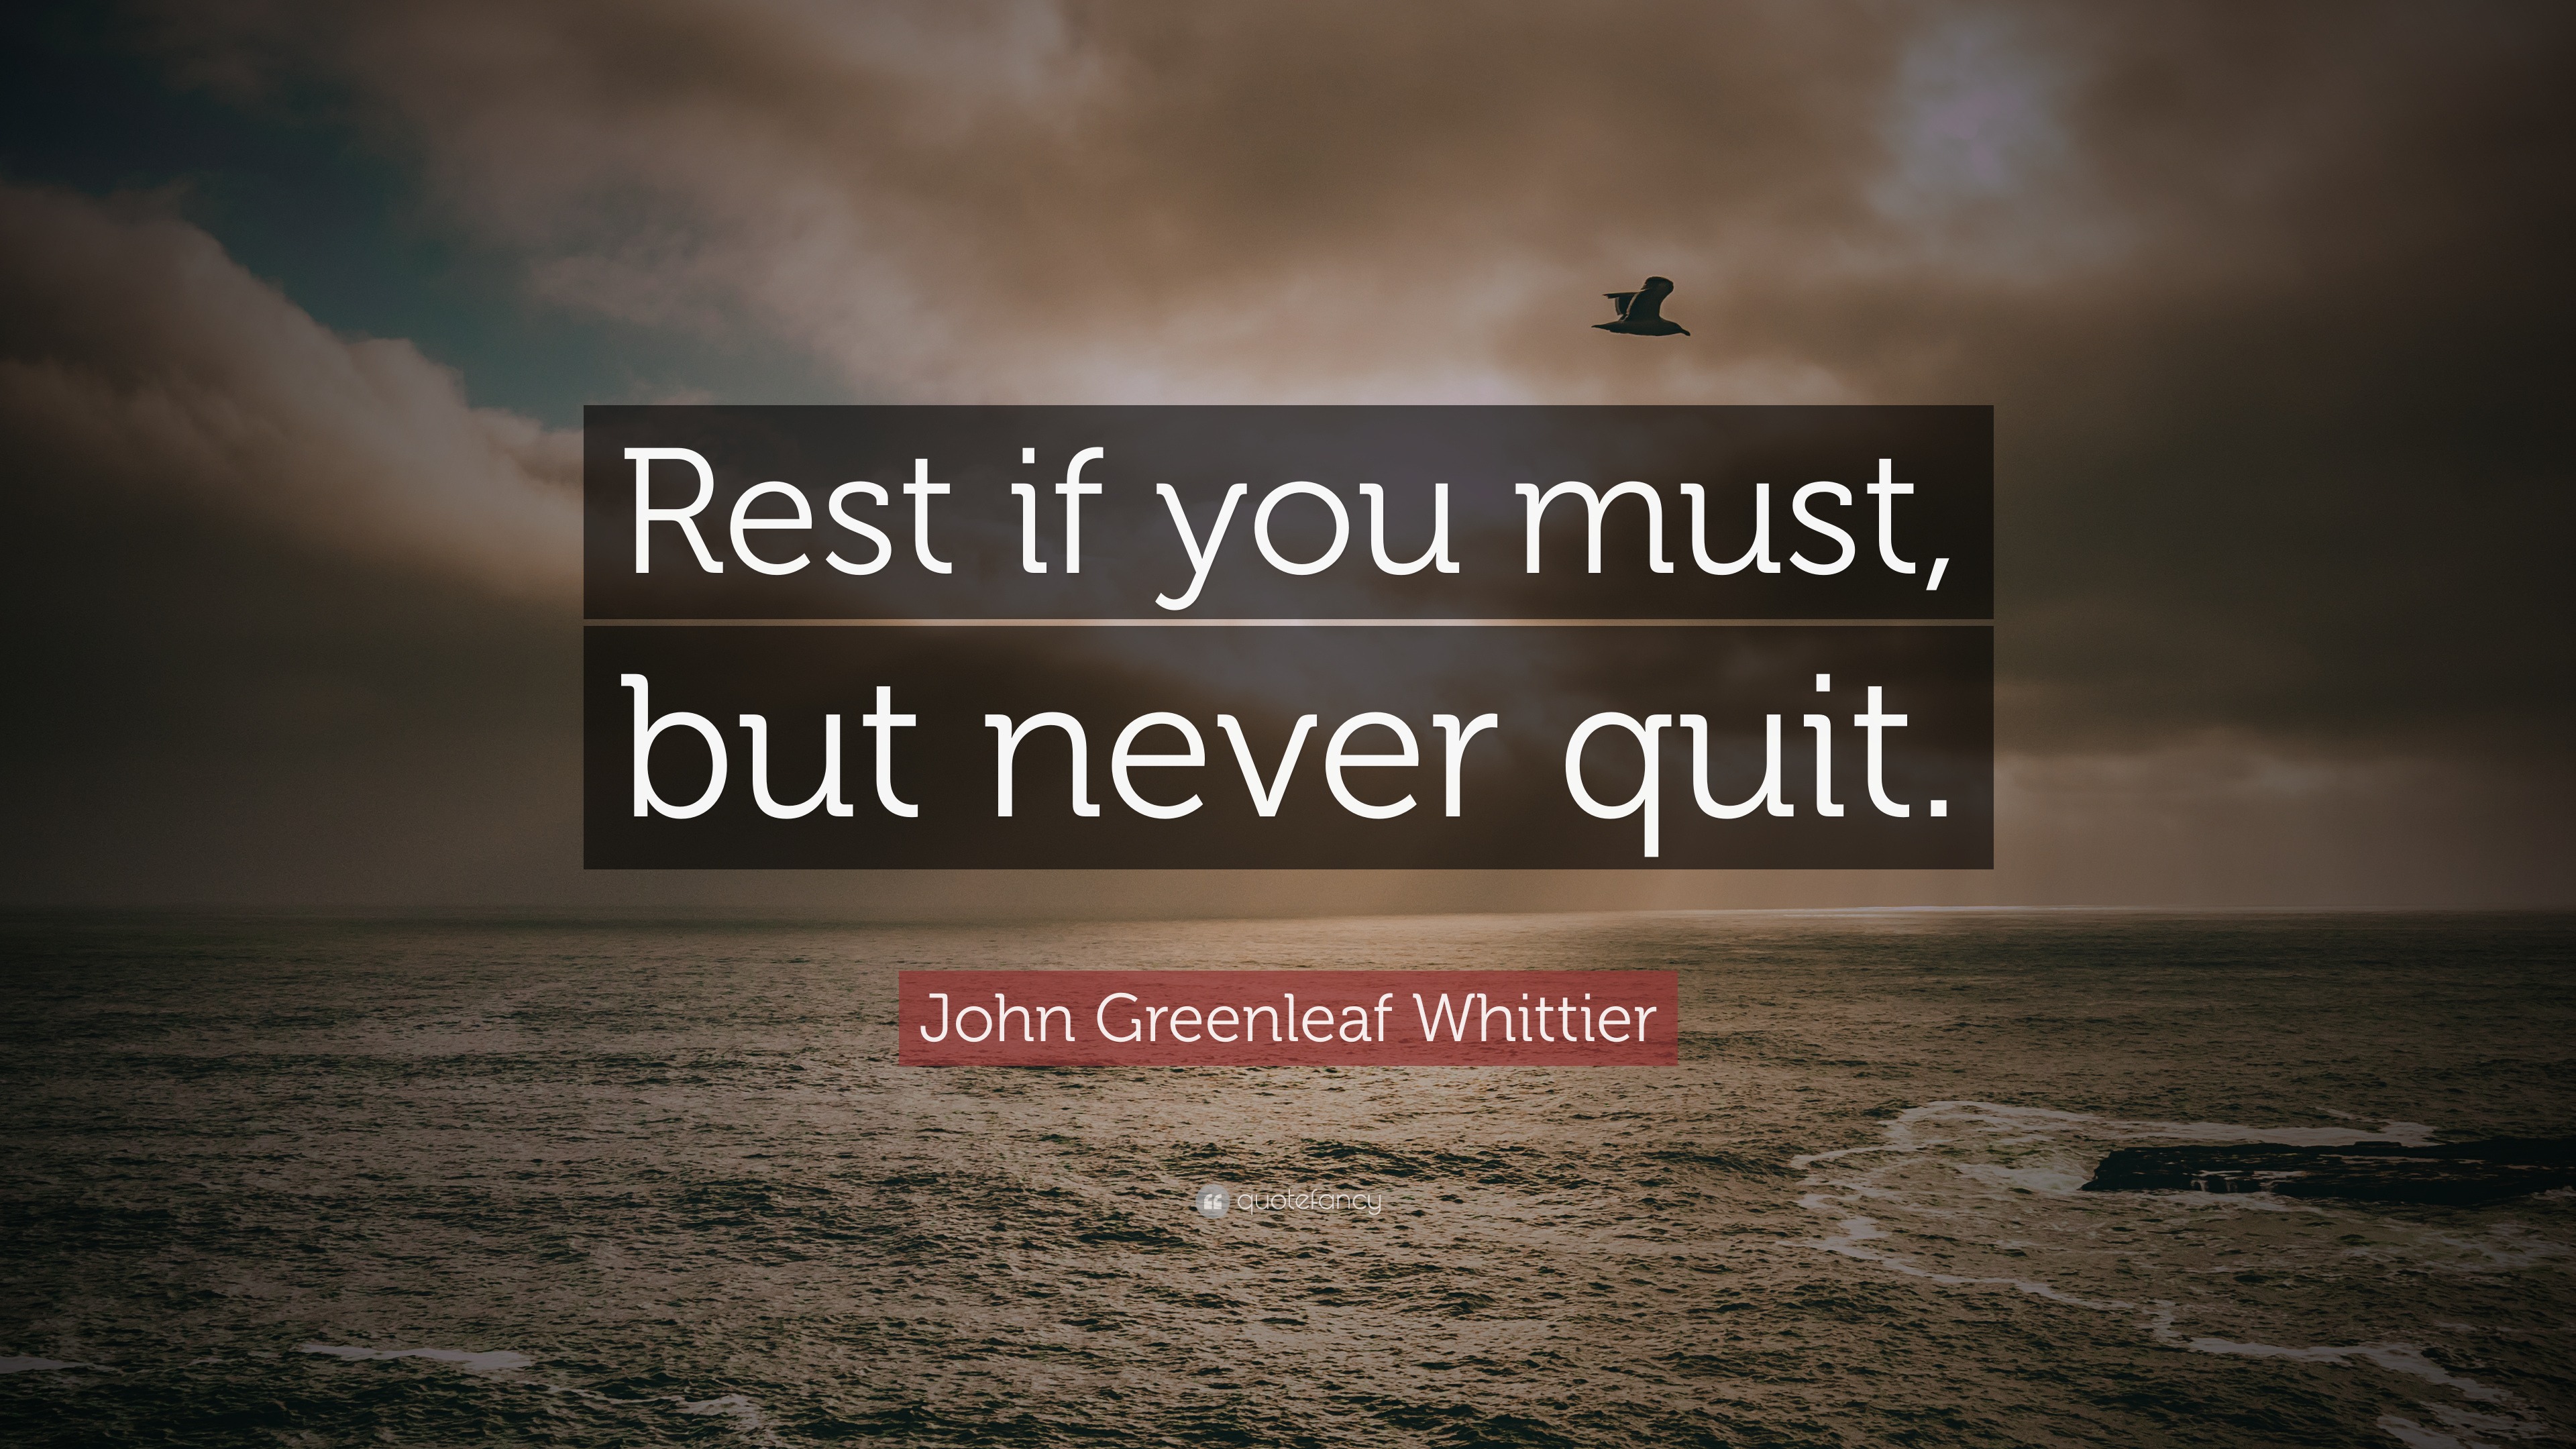 3814621 John Greenleaf Whittier Quote Rest if you must but never quit